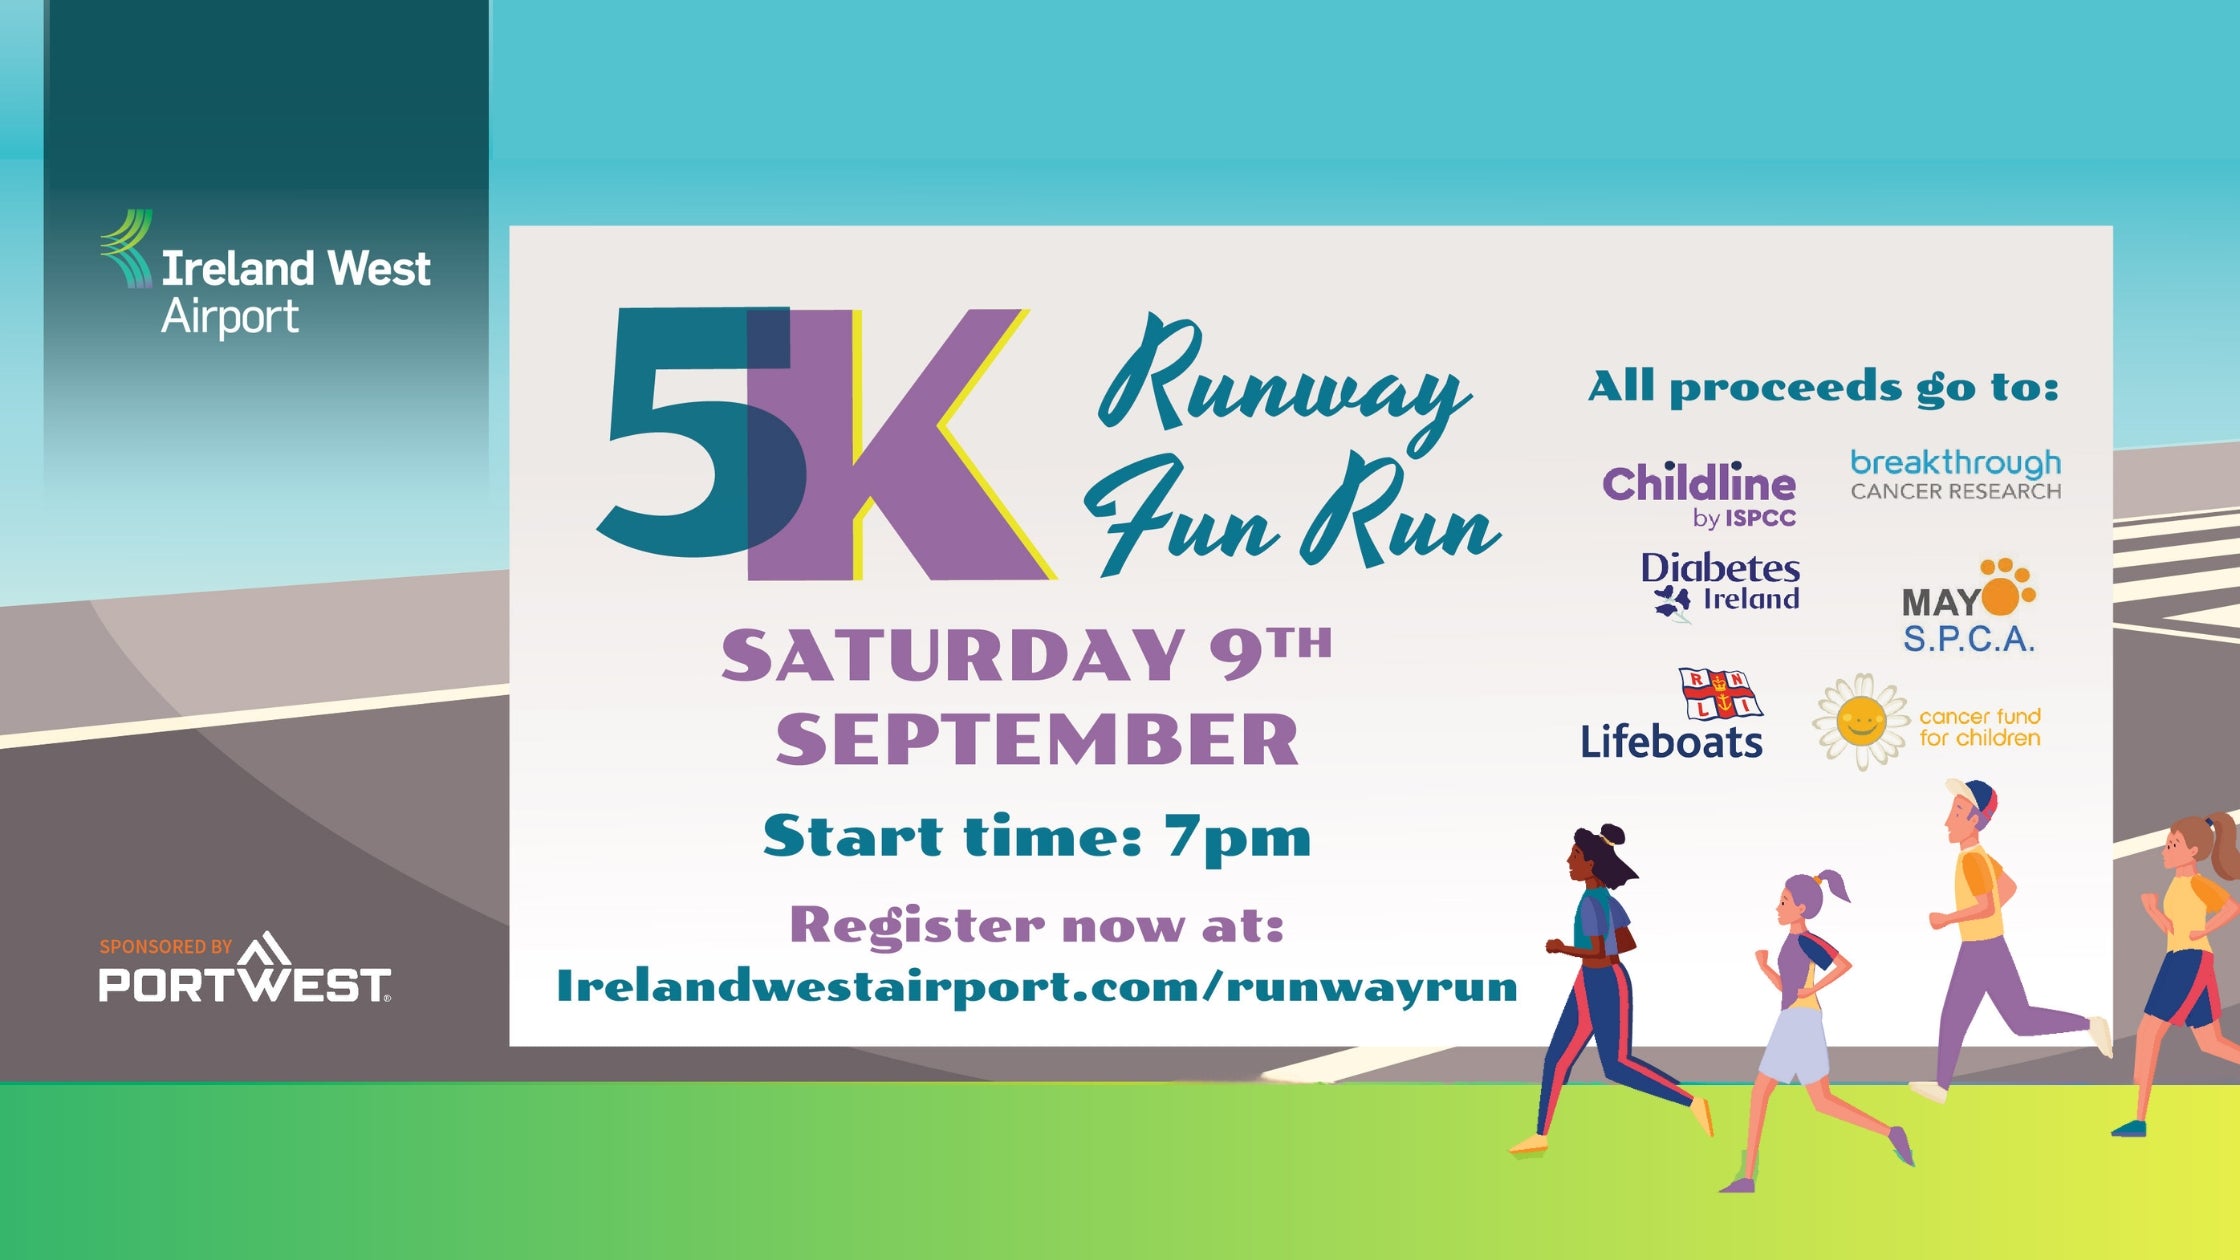 Support 6 Very Worthy Causes in the Annual Charity Runway Fun Run